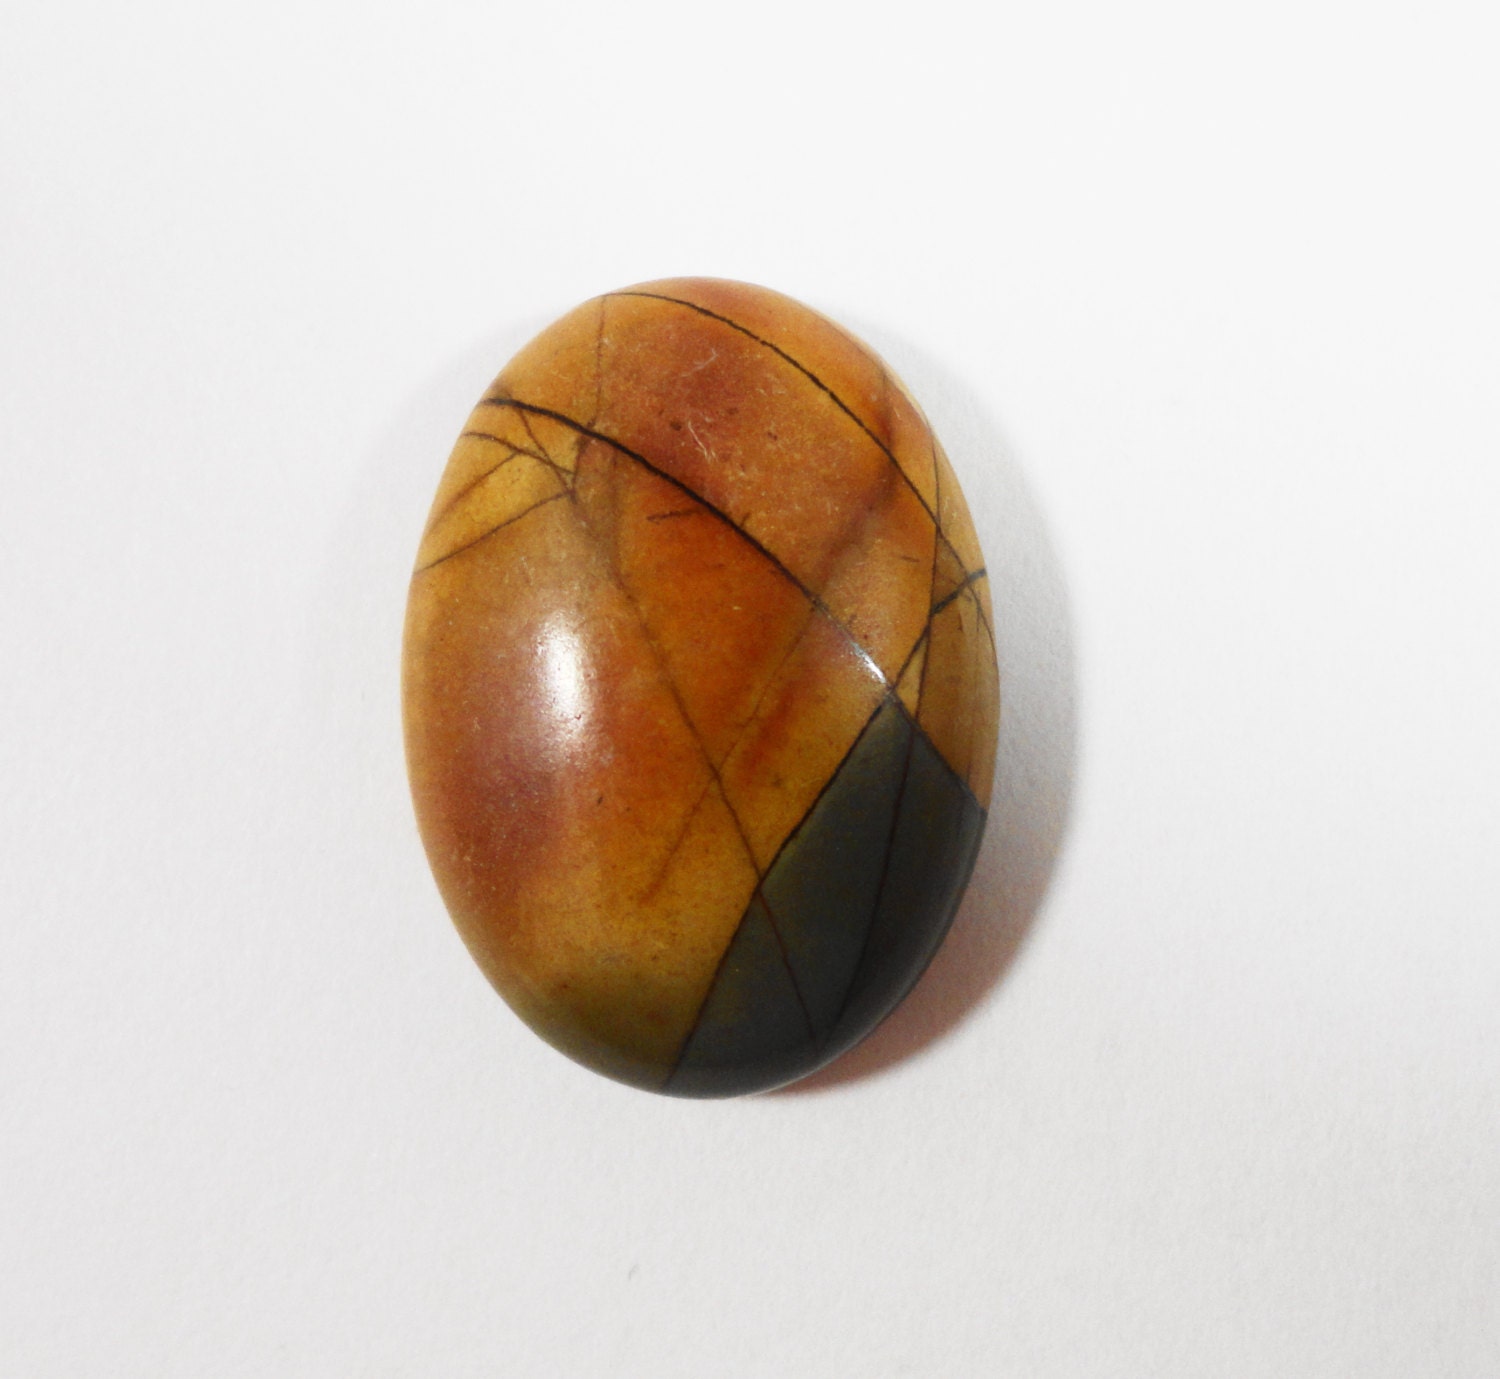 picasso jasper meaning